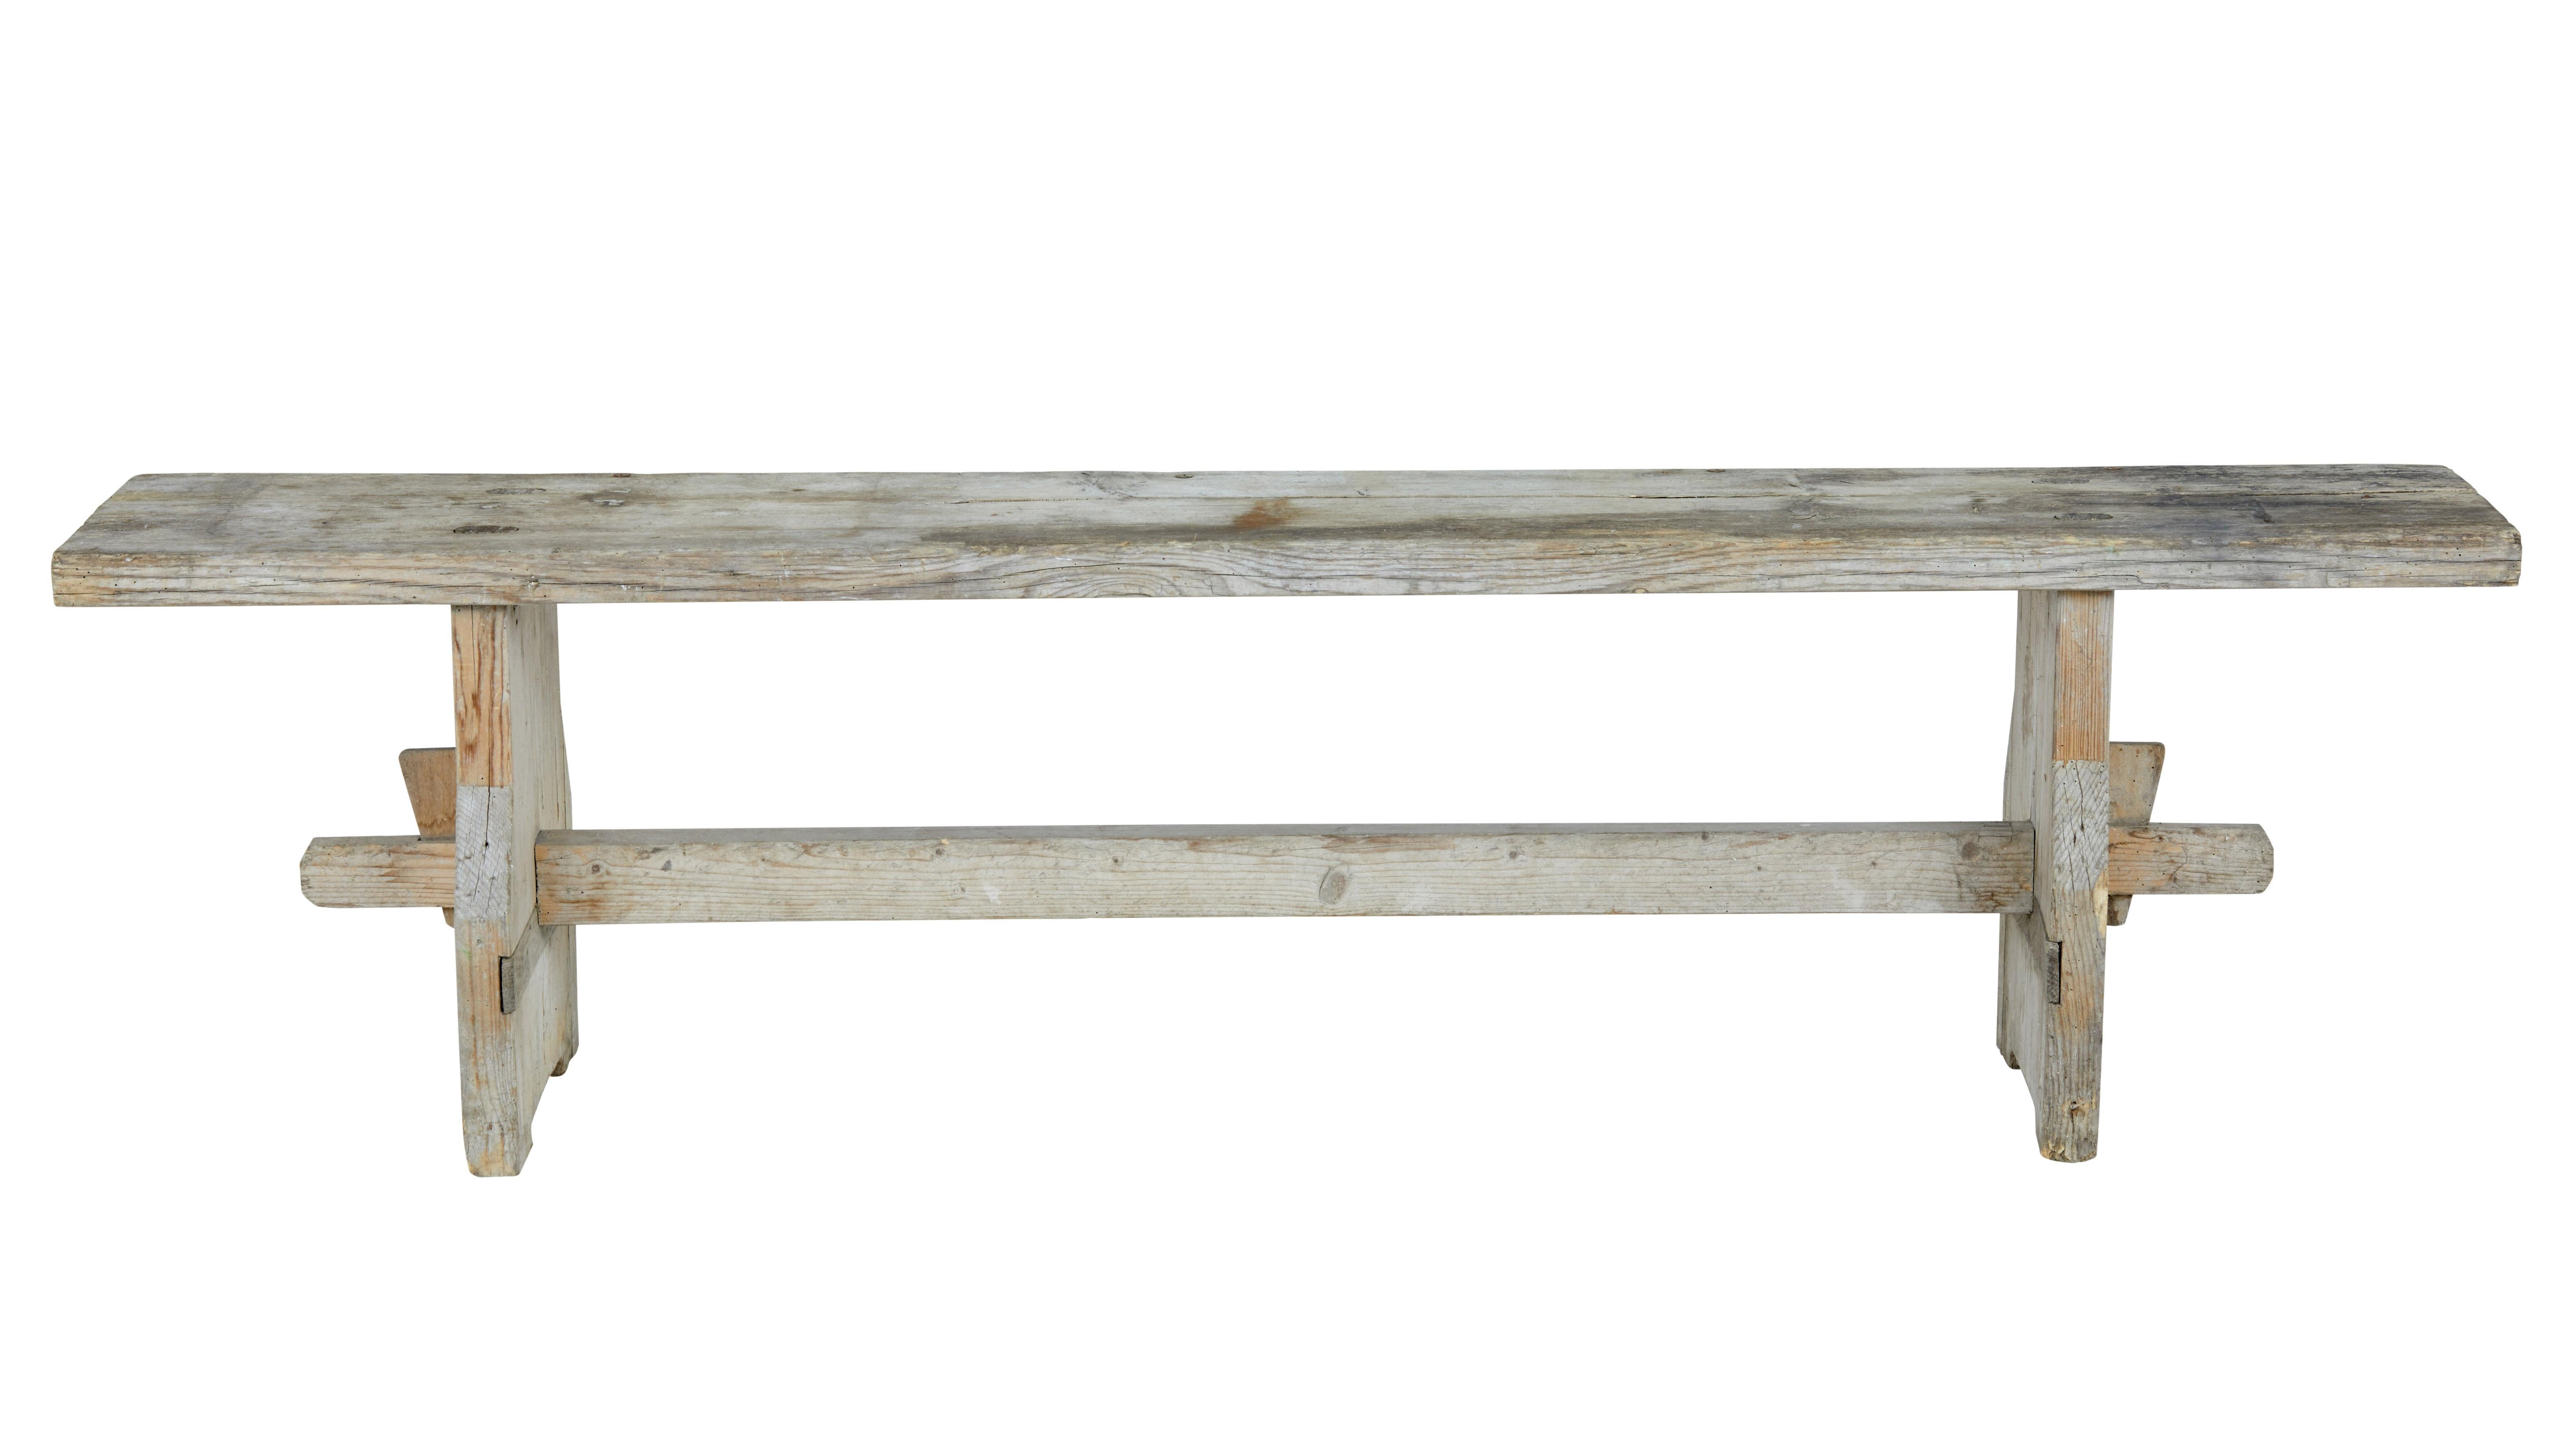 Rustic Swedish pine bench, circa 1880.

Made from heavy Siberian pine. Held in place by dowel and pegs, united by a central stretcher.

Age split to top with obvious signs of fading, evidence of dead treated worm, structurally sound.